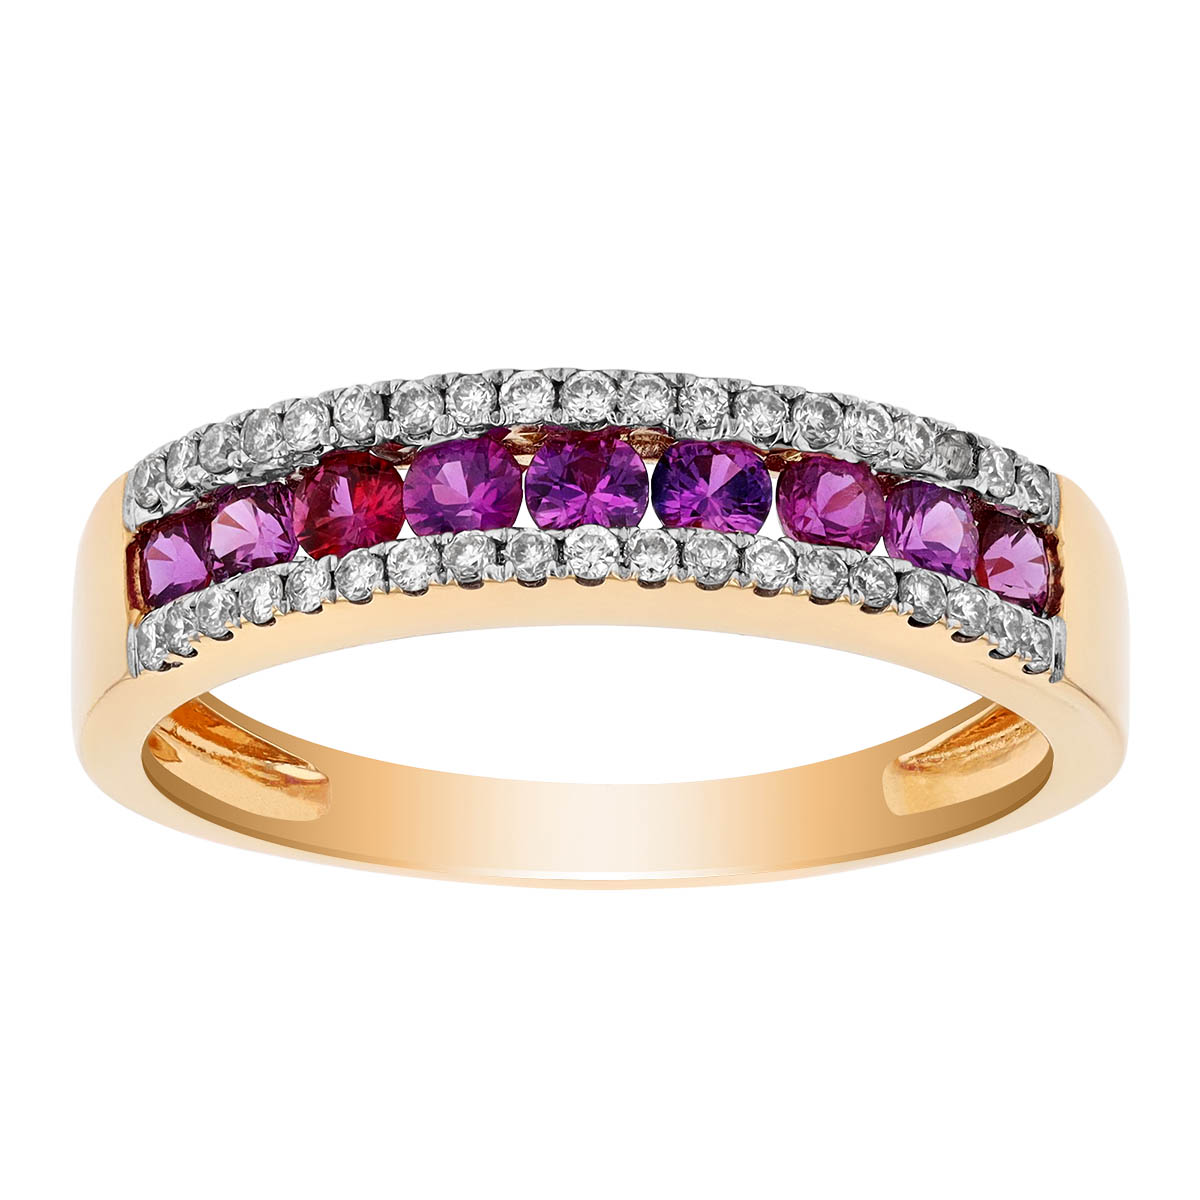 Pink Sapphire & Diamond Channel Set Ring in Yellow Gold | Borsheims